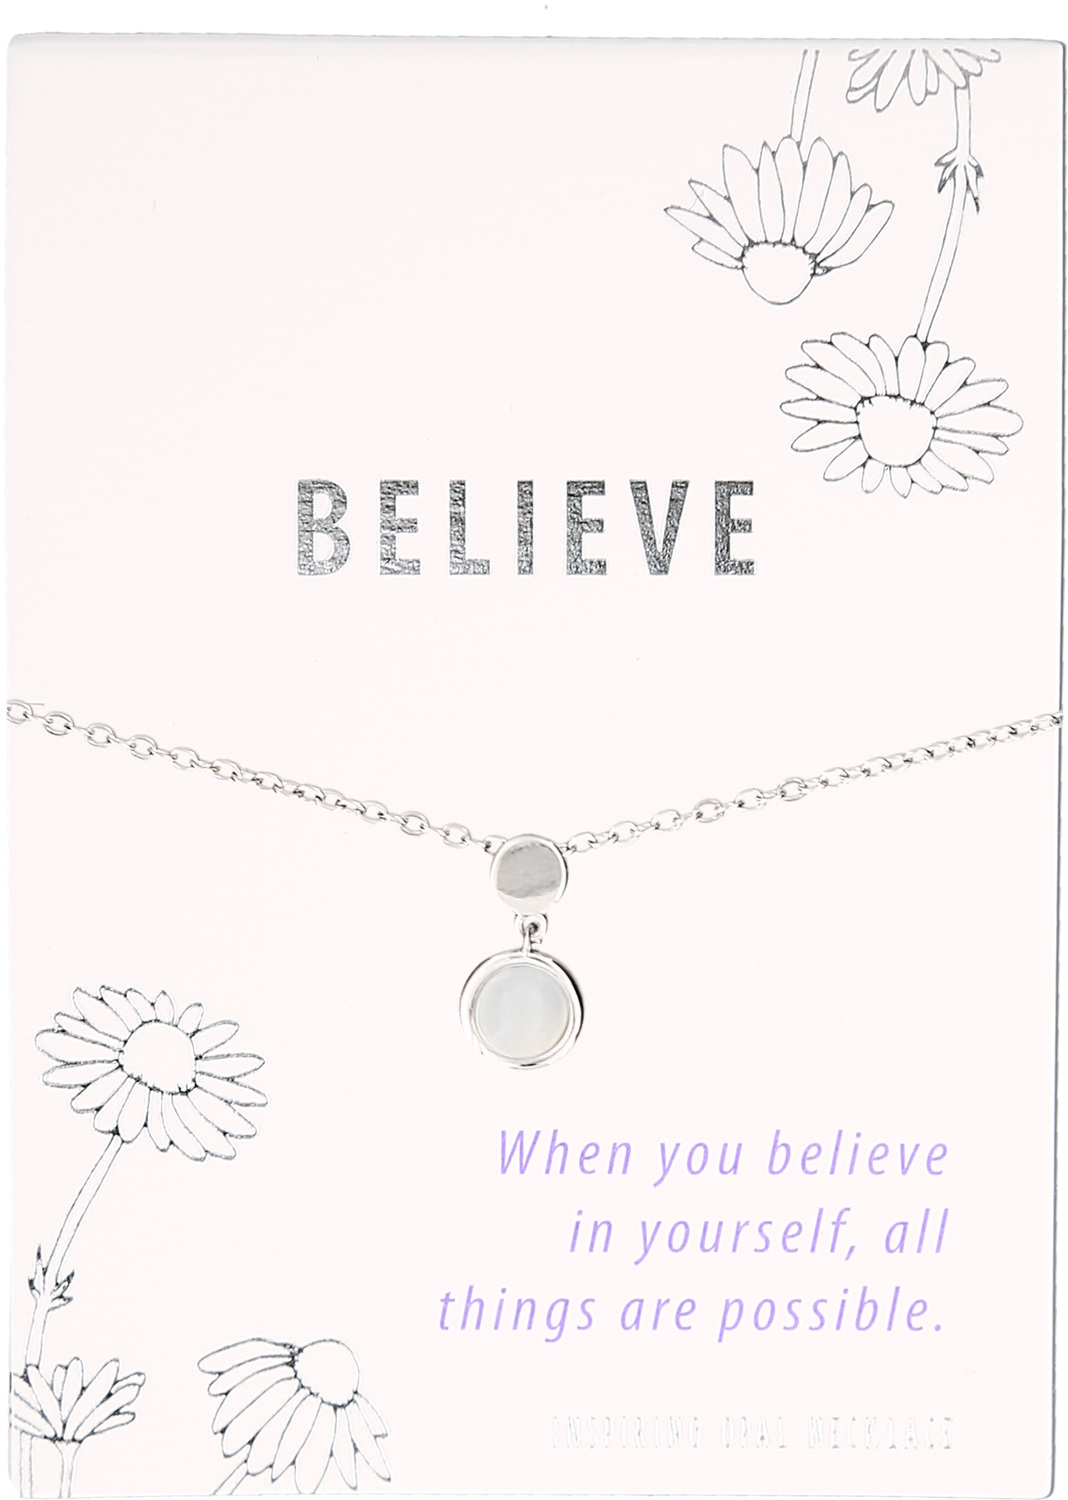 Believe
White Whisper Opal by Faith Hope and Healing - Believe
White Whisper Opal - 16.5"-18.5" Rhodium Plated Inspirational Necklace